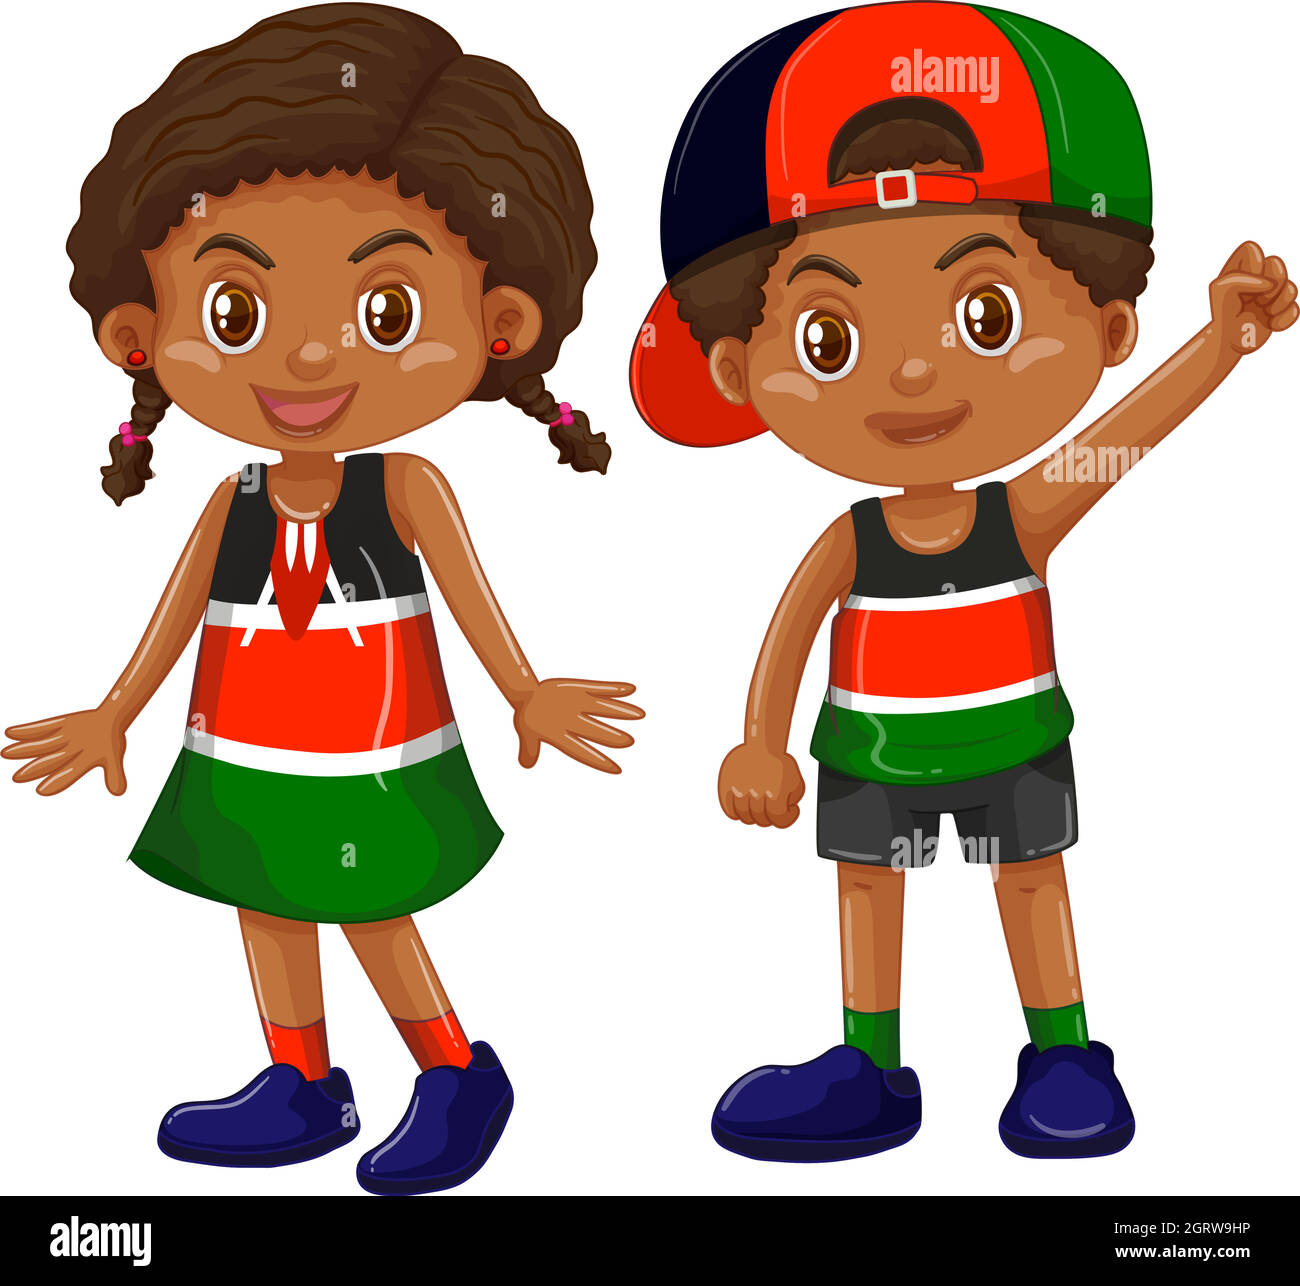 Girl and boy from Kenya Stock Vector